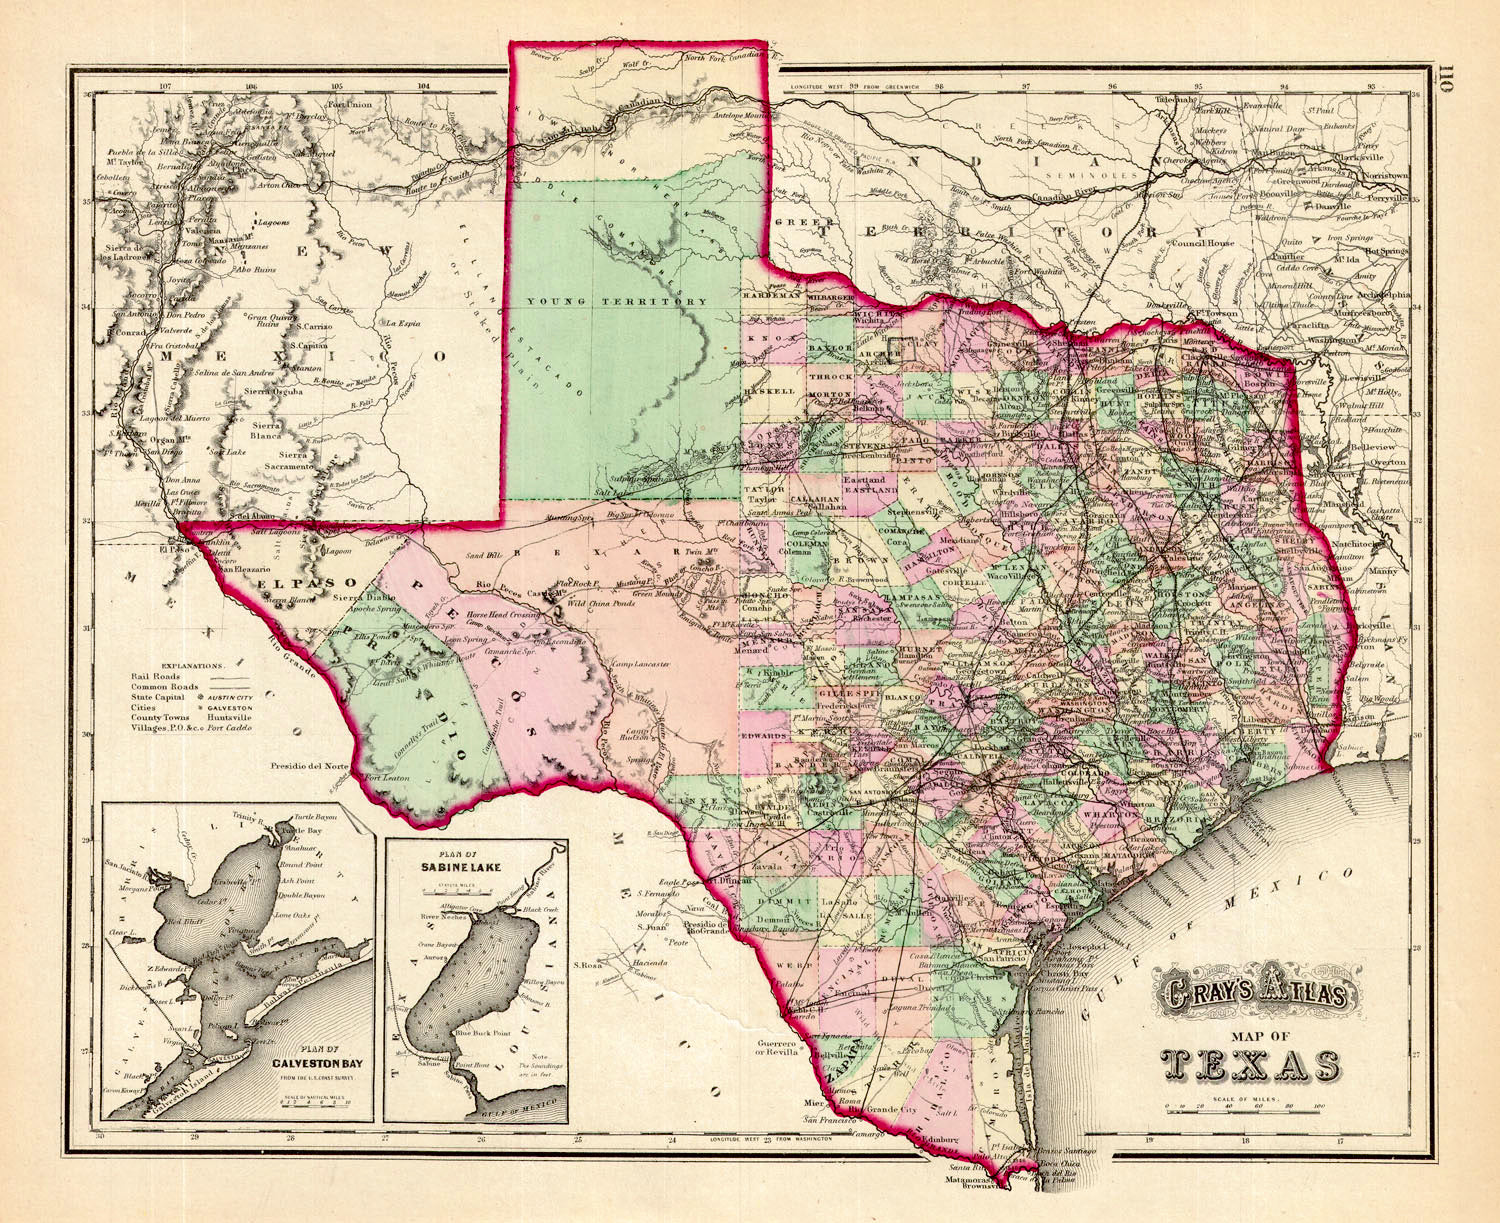 Map of Texas Gray, 1874 While "Kiowa Northern and Middle Comanches" roam the panhandle and north Texas, named but uninhabited counties in the east and central Texas begin to fill in. Railroads begin to stretch into every county in the east. West Texas has few trails and towns and remains divided by four great counties.  Condition is very good. Image size is approximately 12.5 x 15 (inches) $245.00